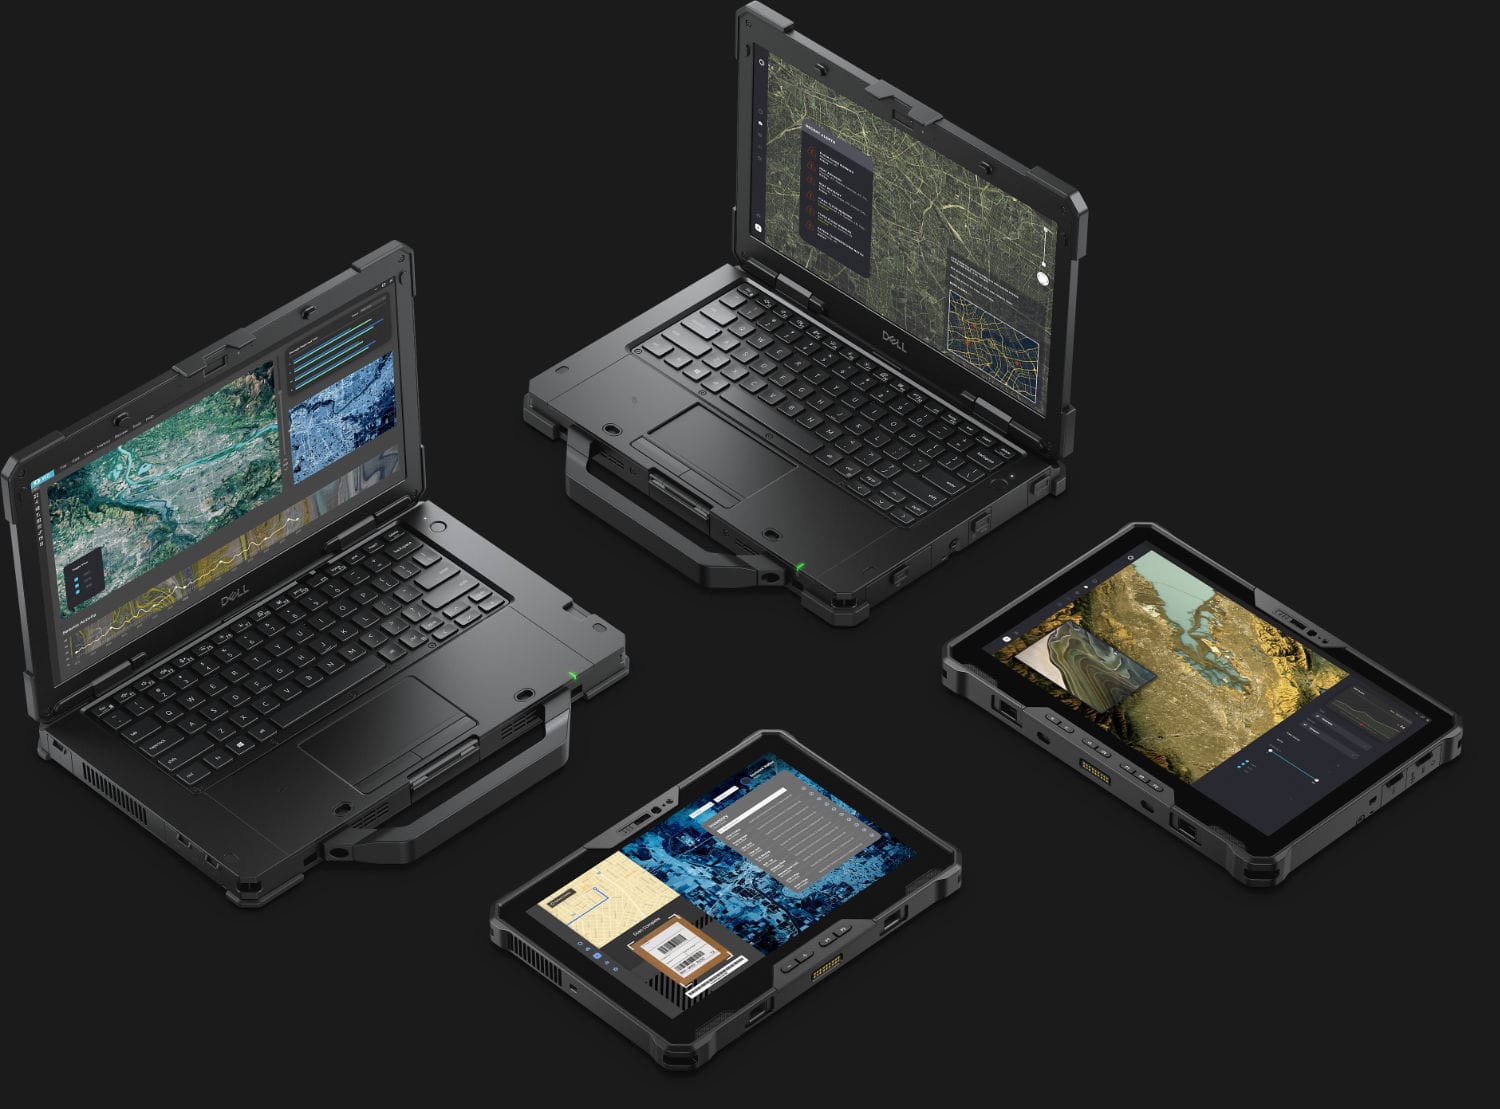 Dell announces its Latitude 7030 rugged tablet and Precision 7875 tower PC